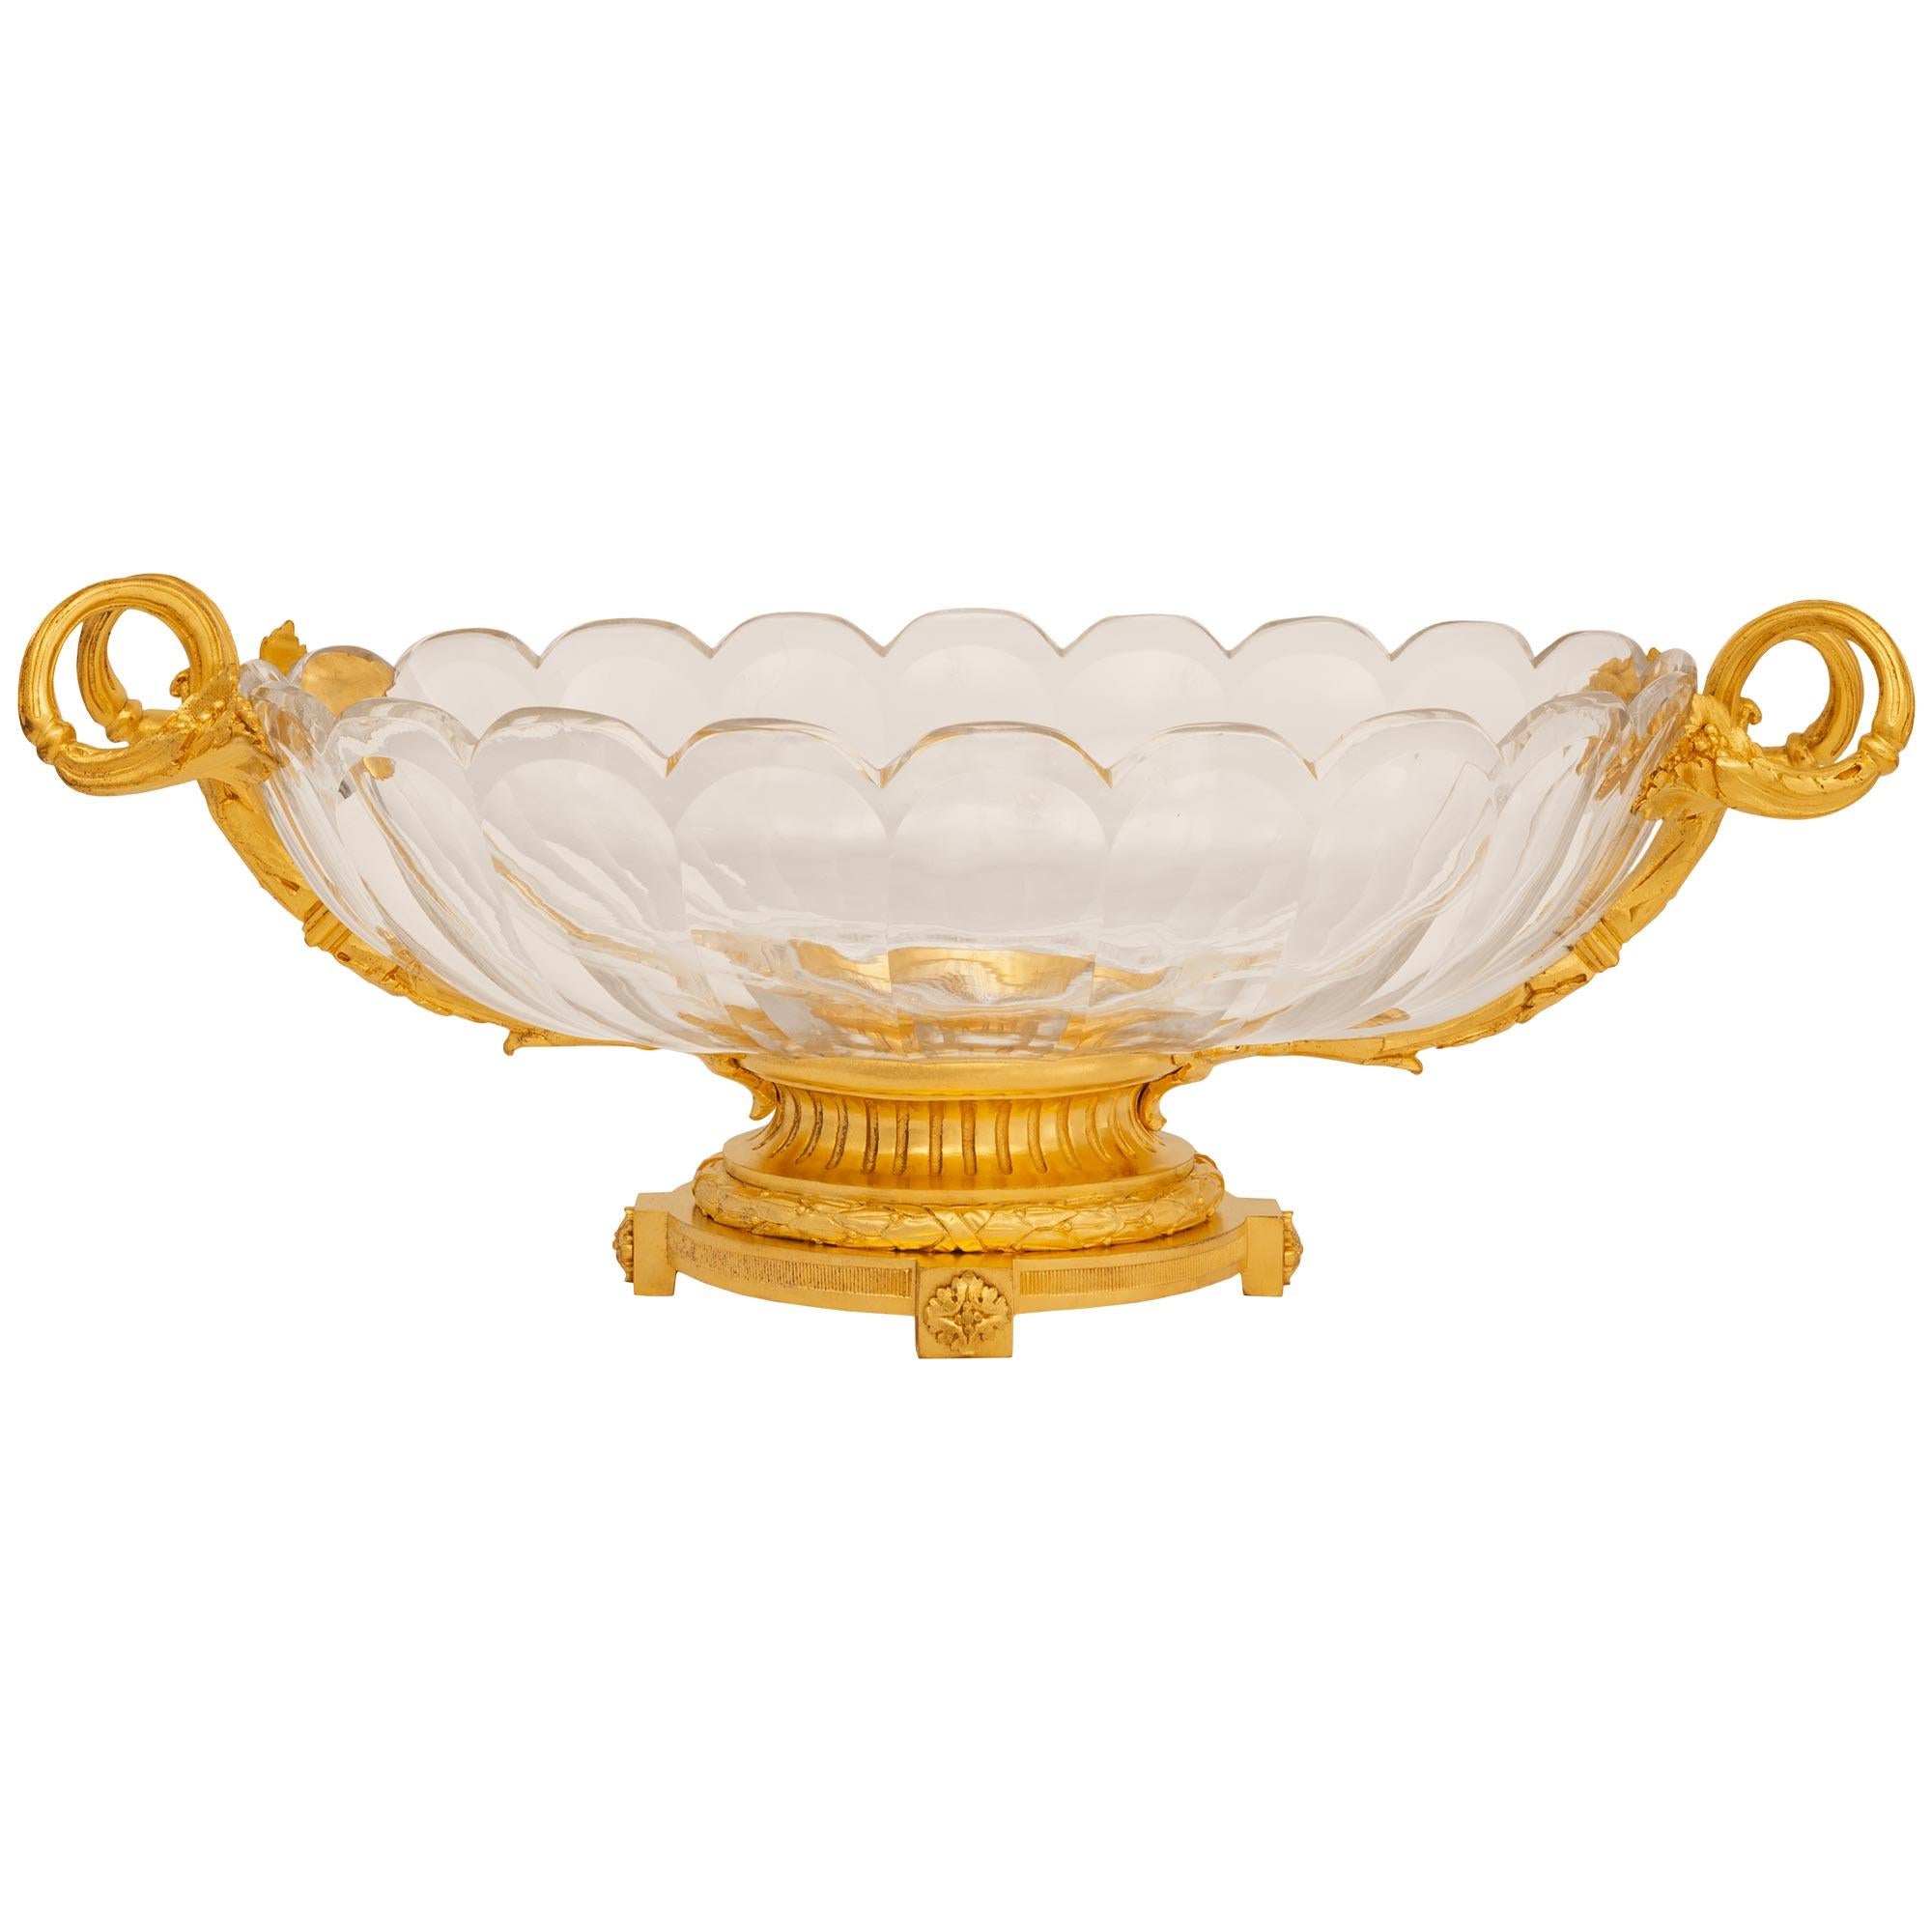 Belle Époque French 19th Century Belle Epoque Period Ormolu And Baccarat Crystal Centerpiece For Sale